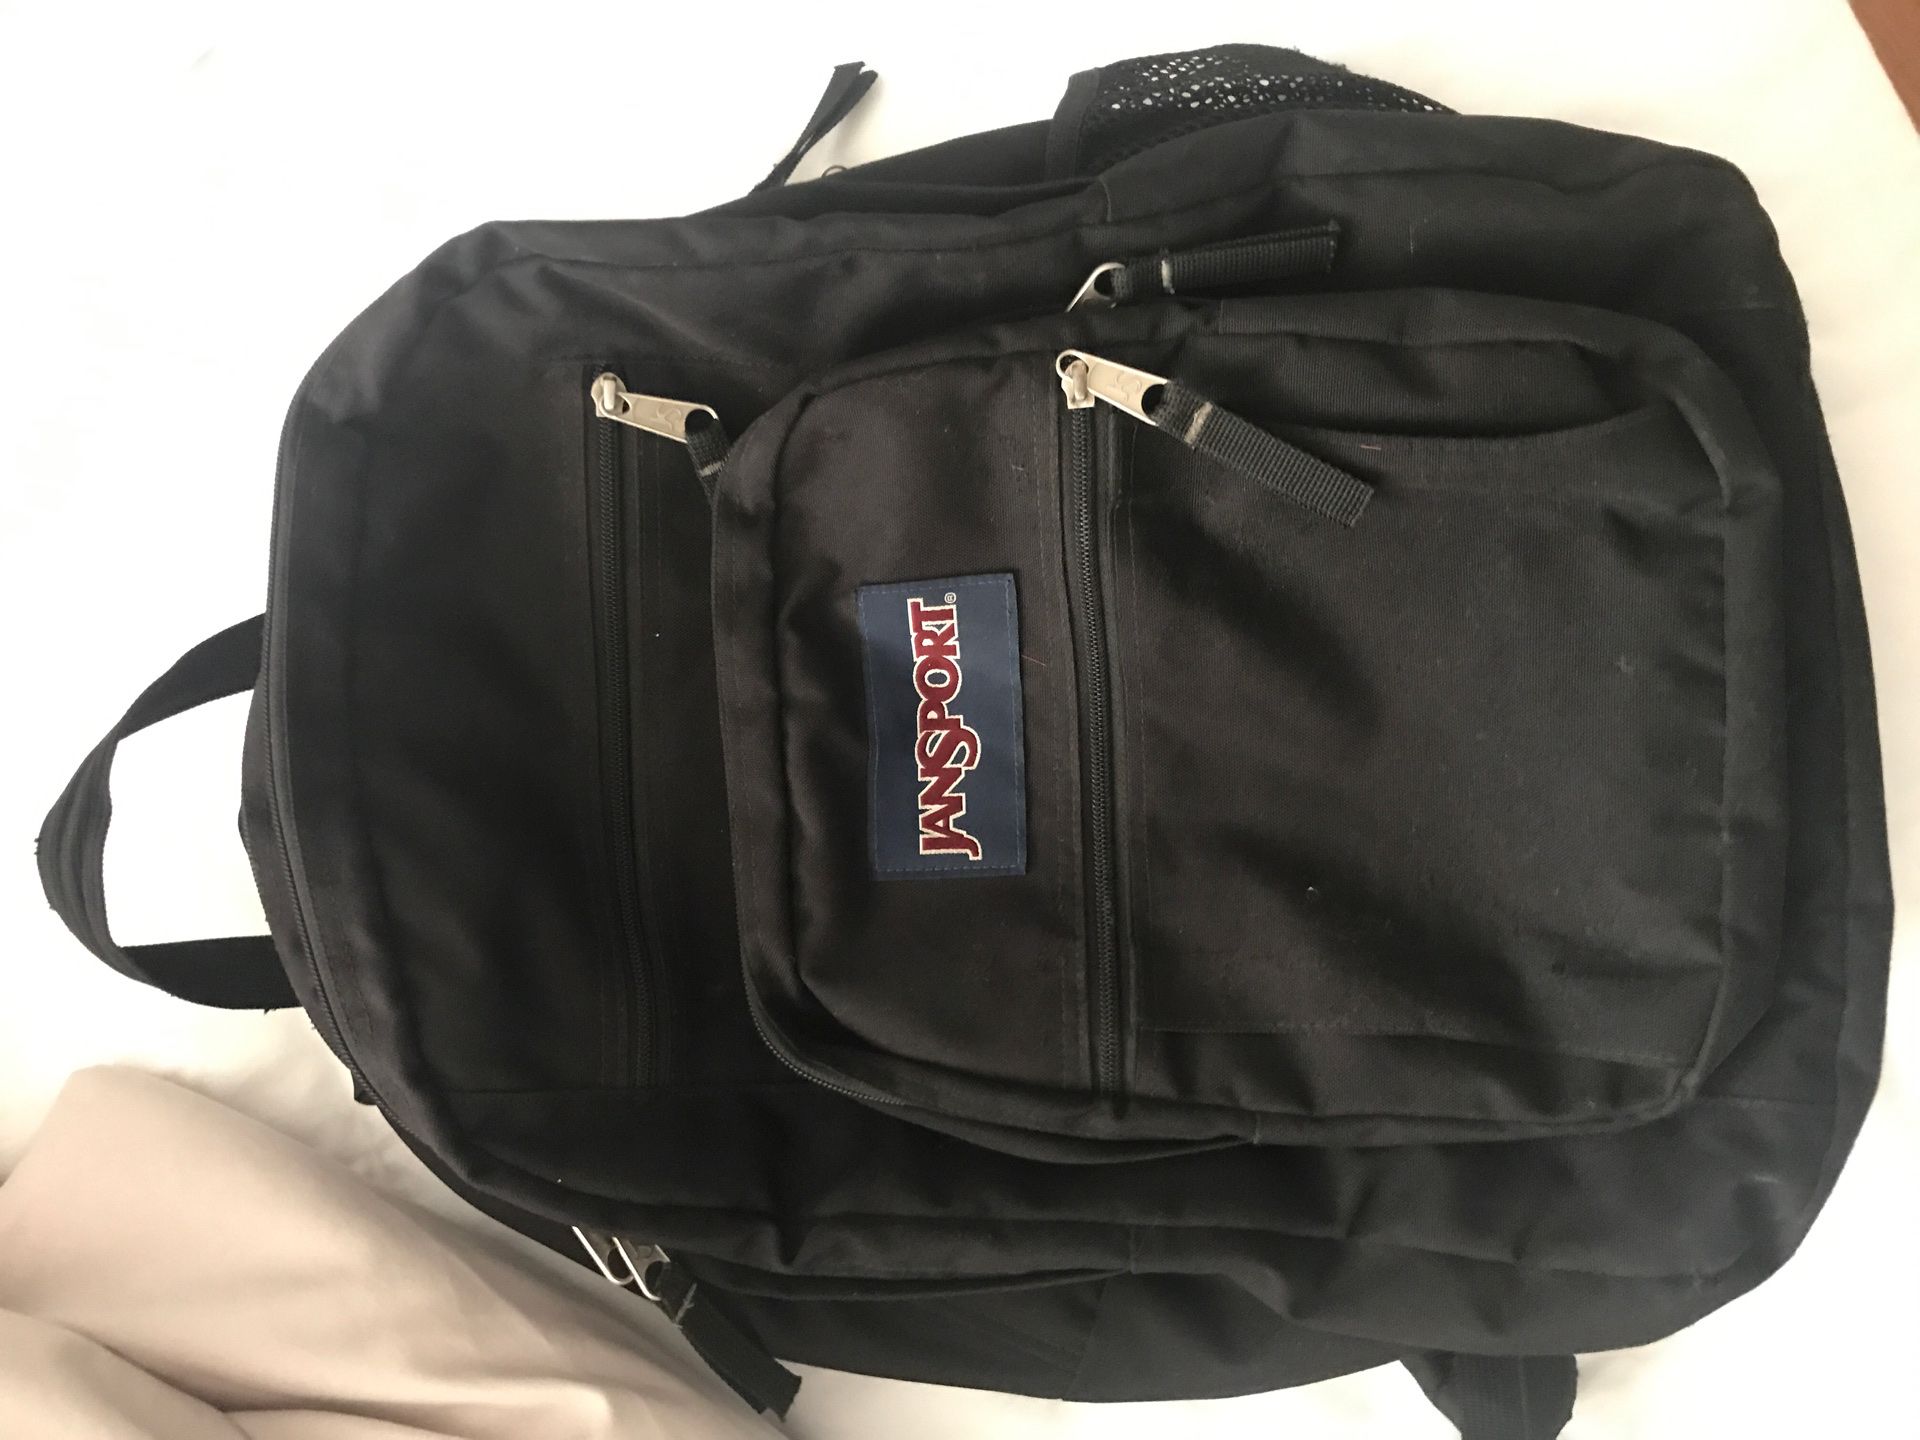 Perfect condition jansport backpack